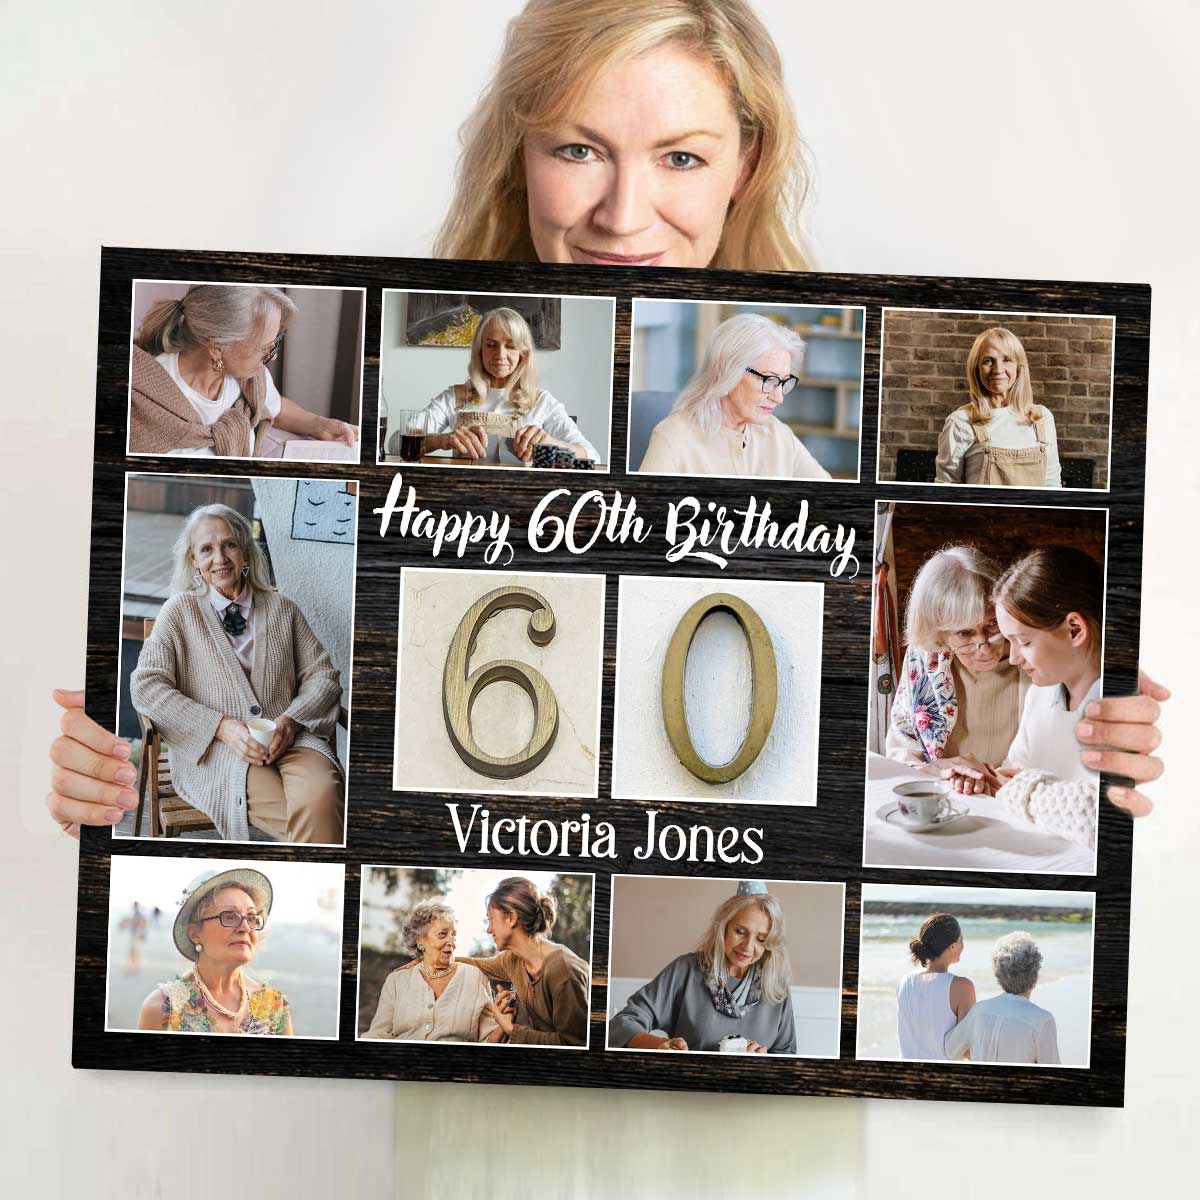 Personalized 60th Birthday Photo Collage, 60th Birthday Gift For Men Or Women, 60th Birthday Gift Ideas